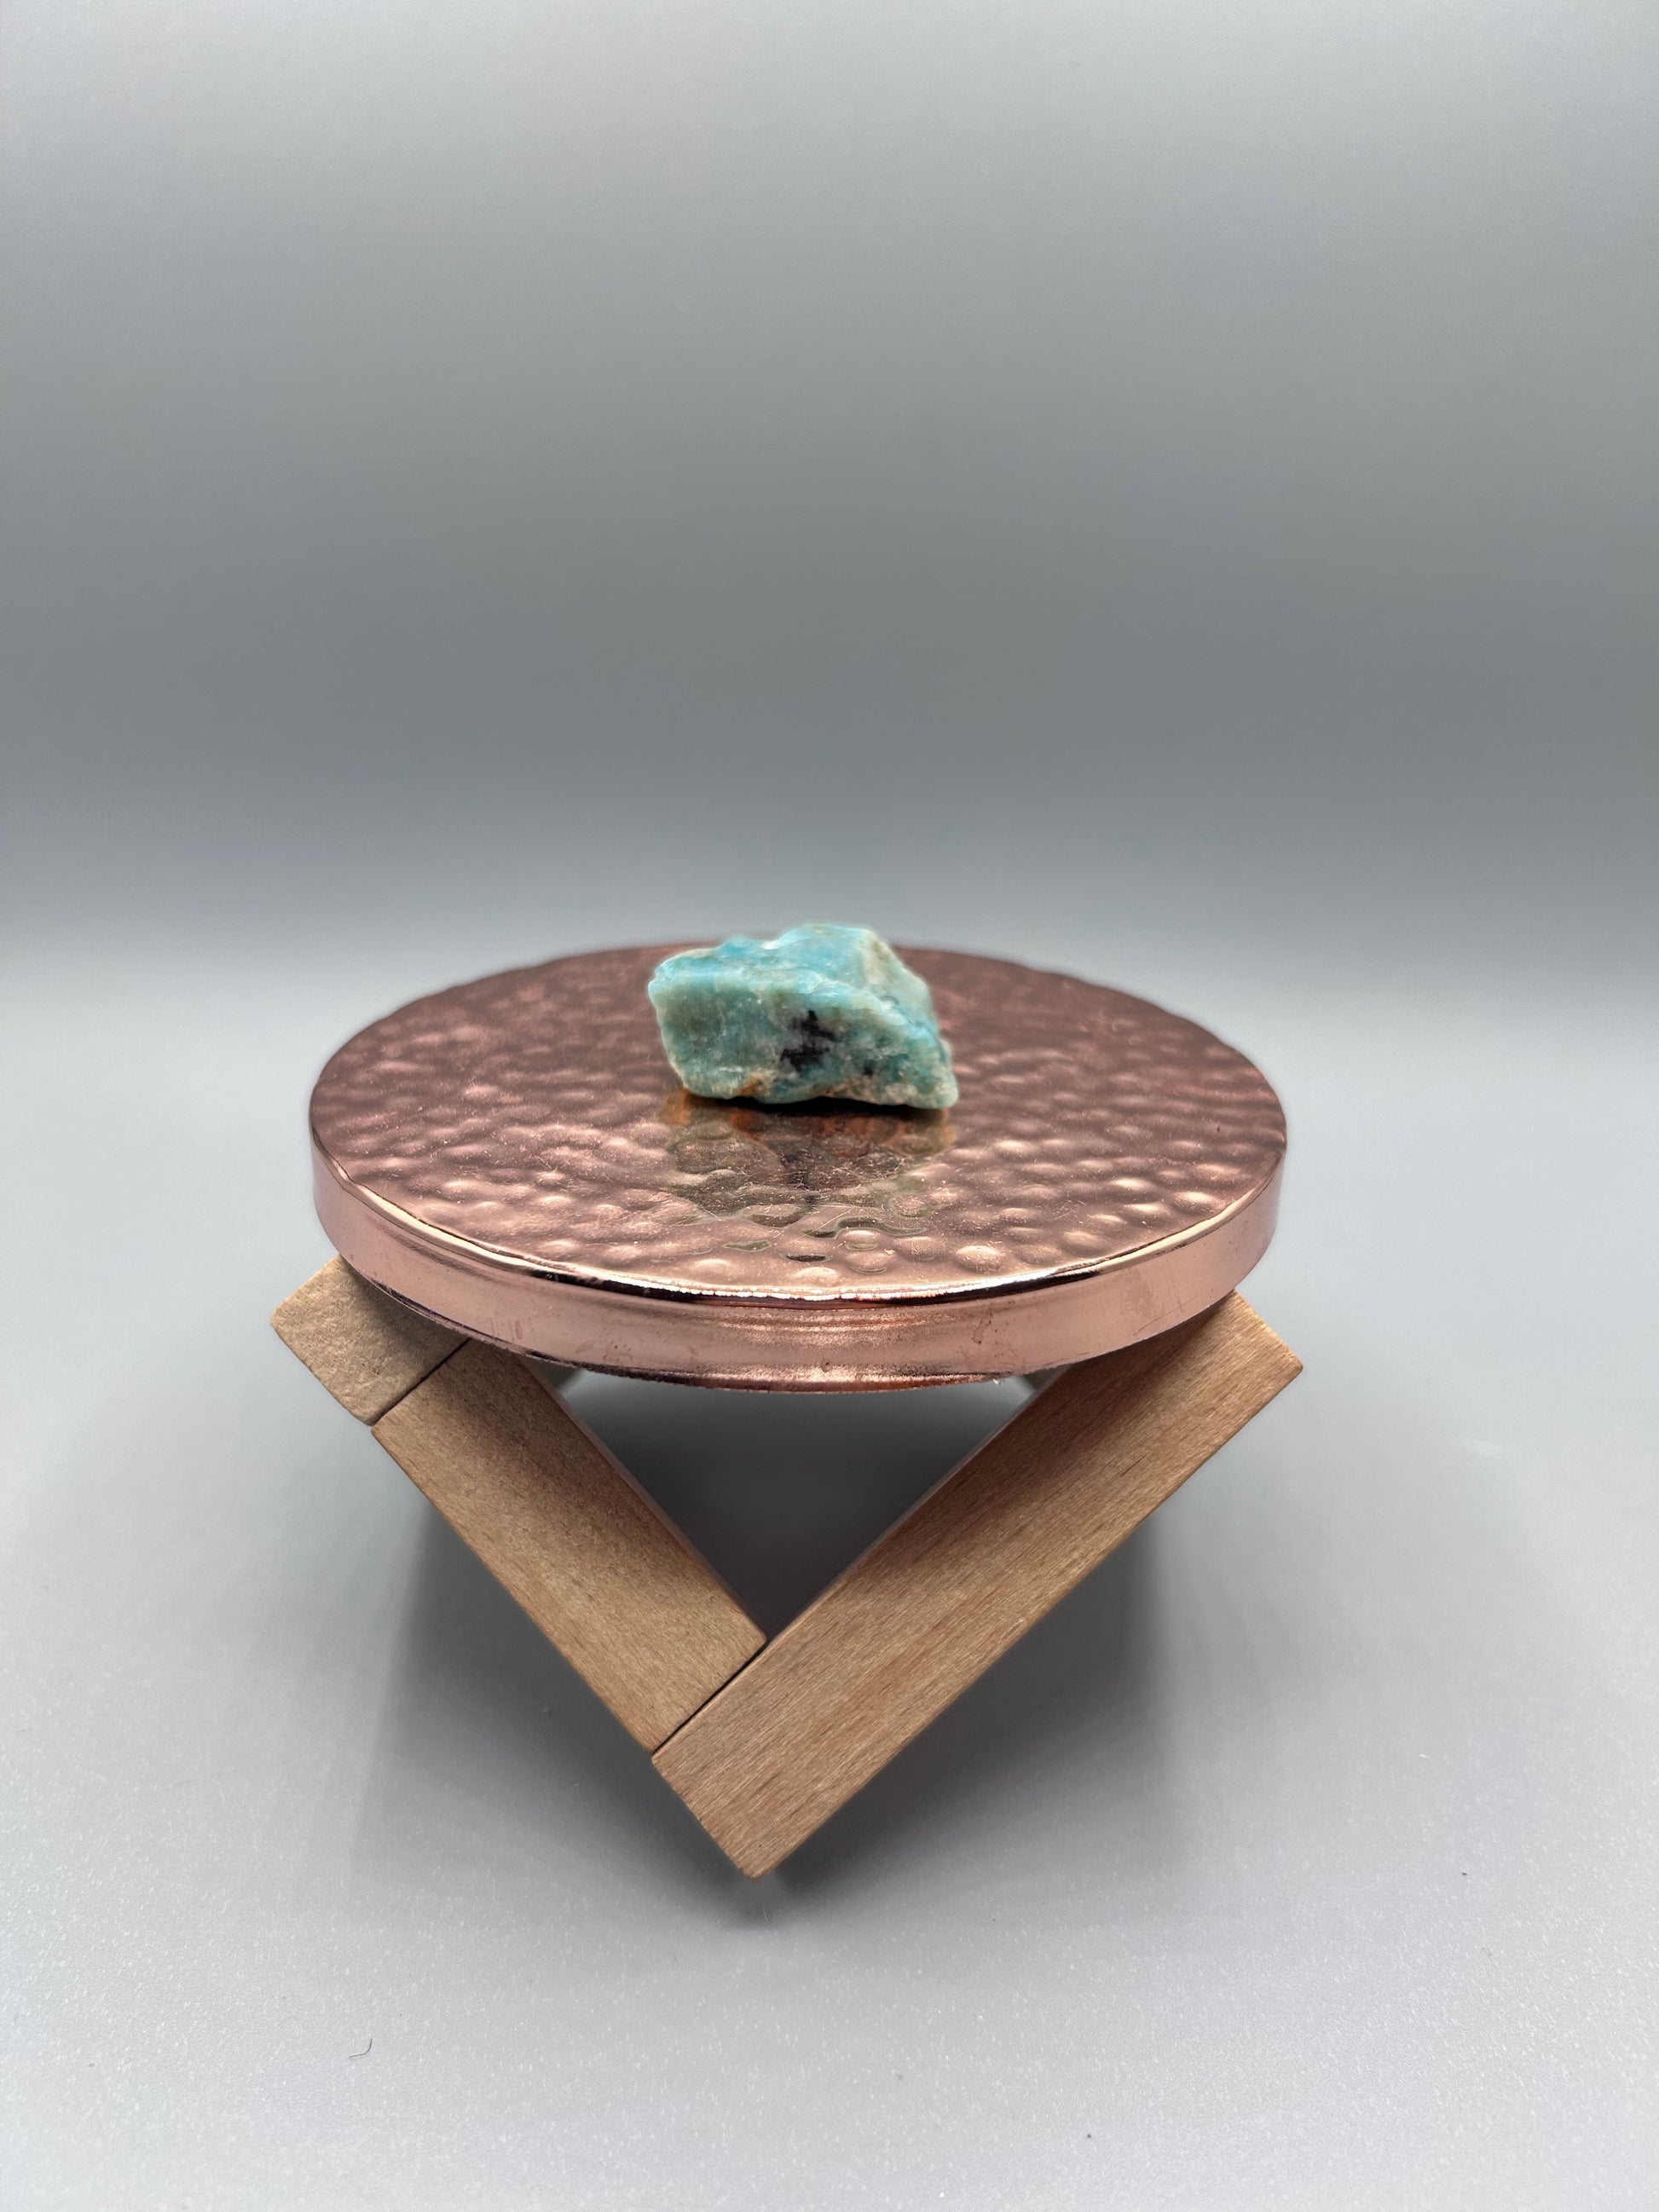 amazonite stone posed inside on copper plate.